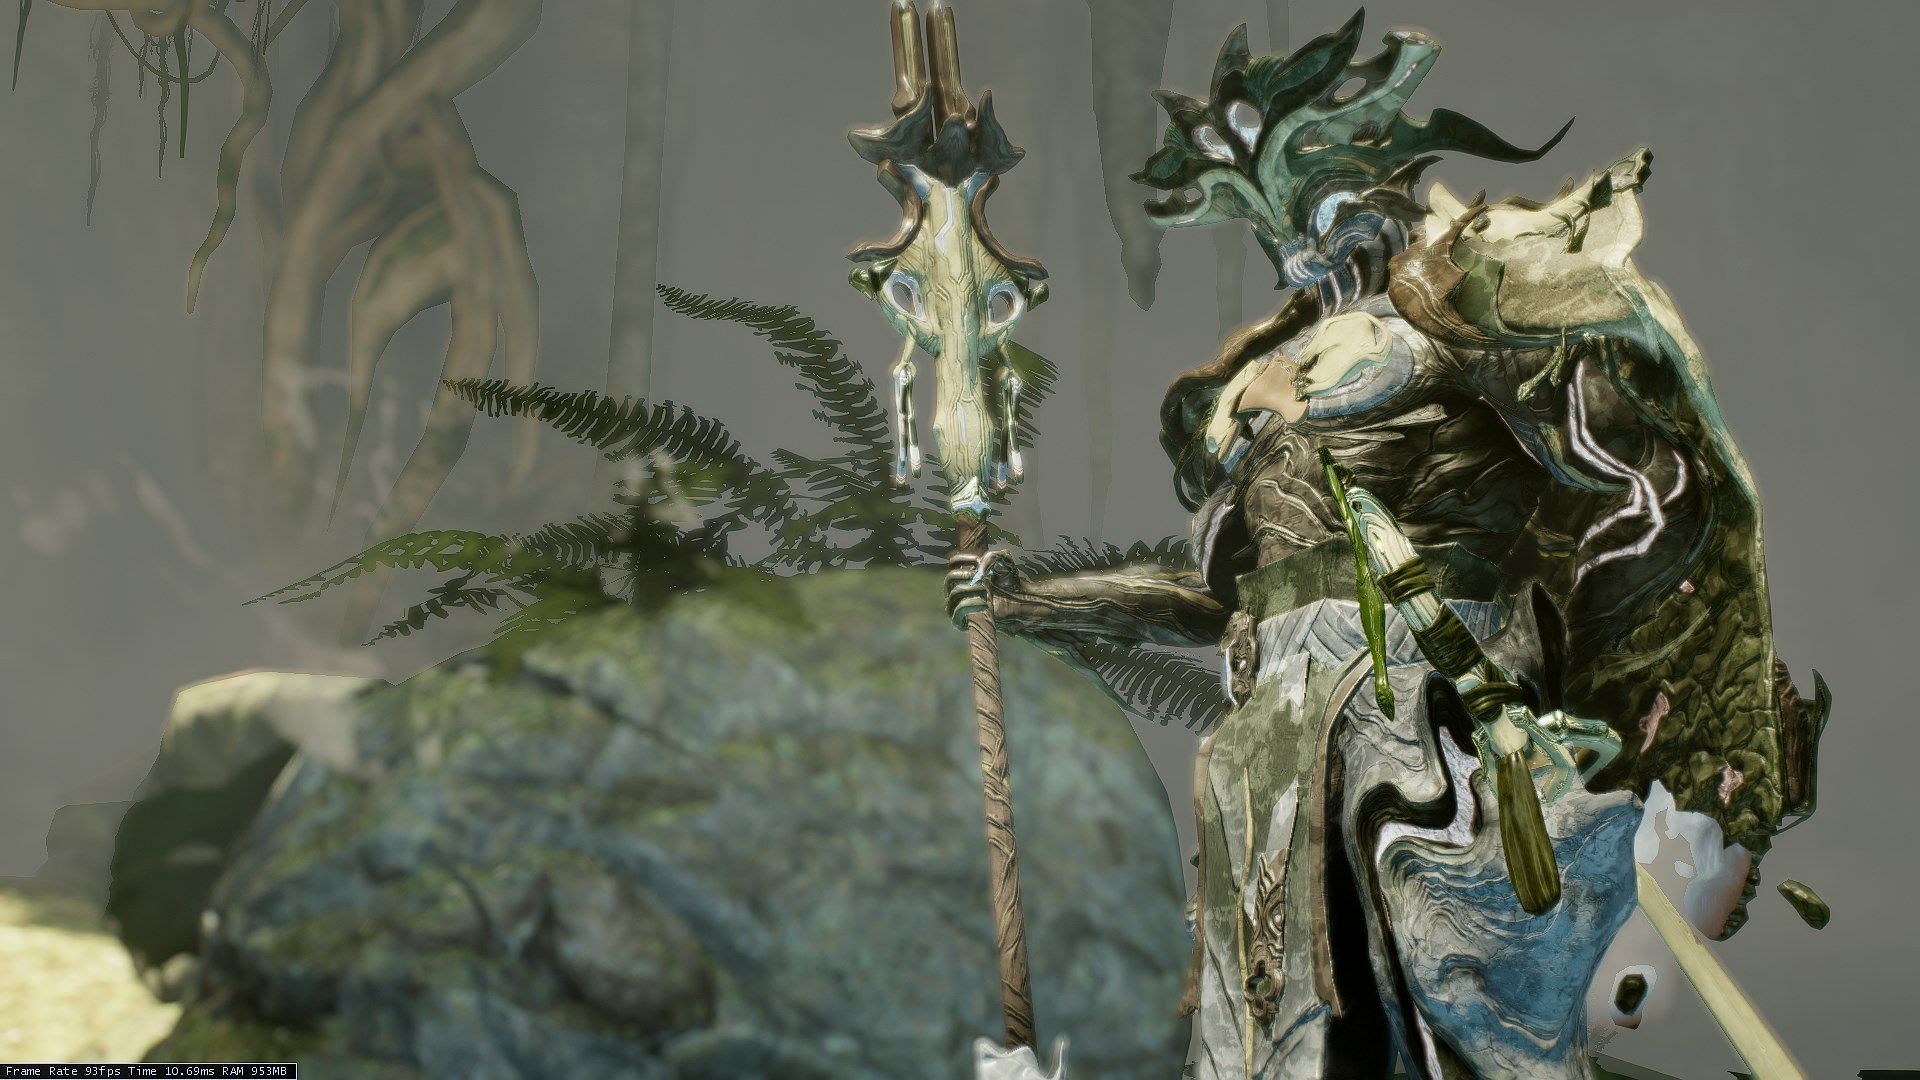 A Hydroid adorned in the Rakkam Delux set posing in captura with a speargun